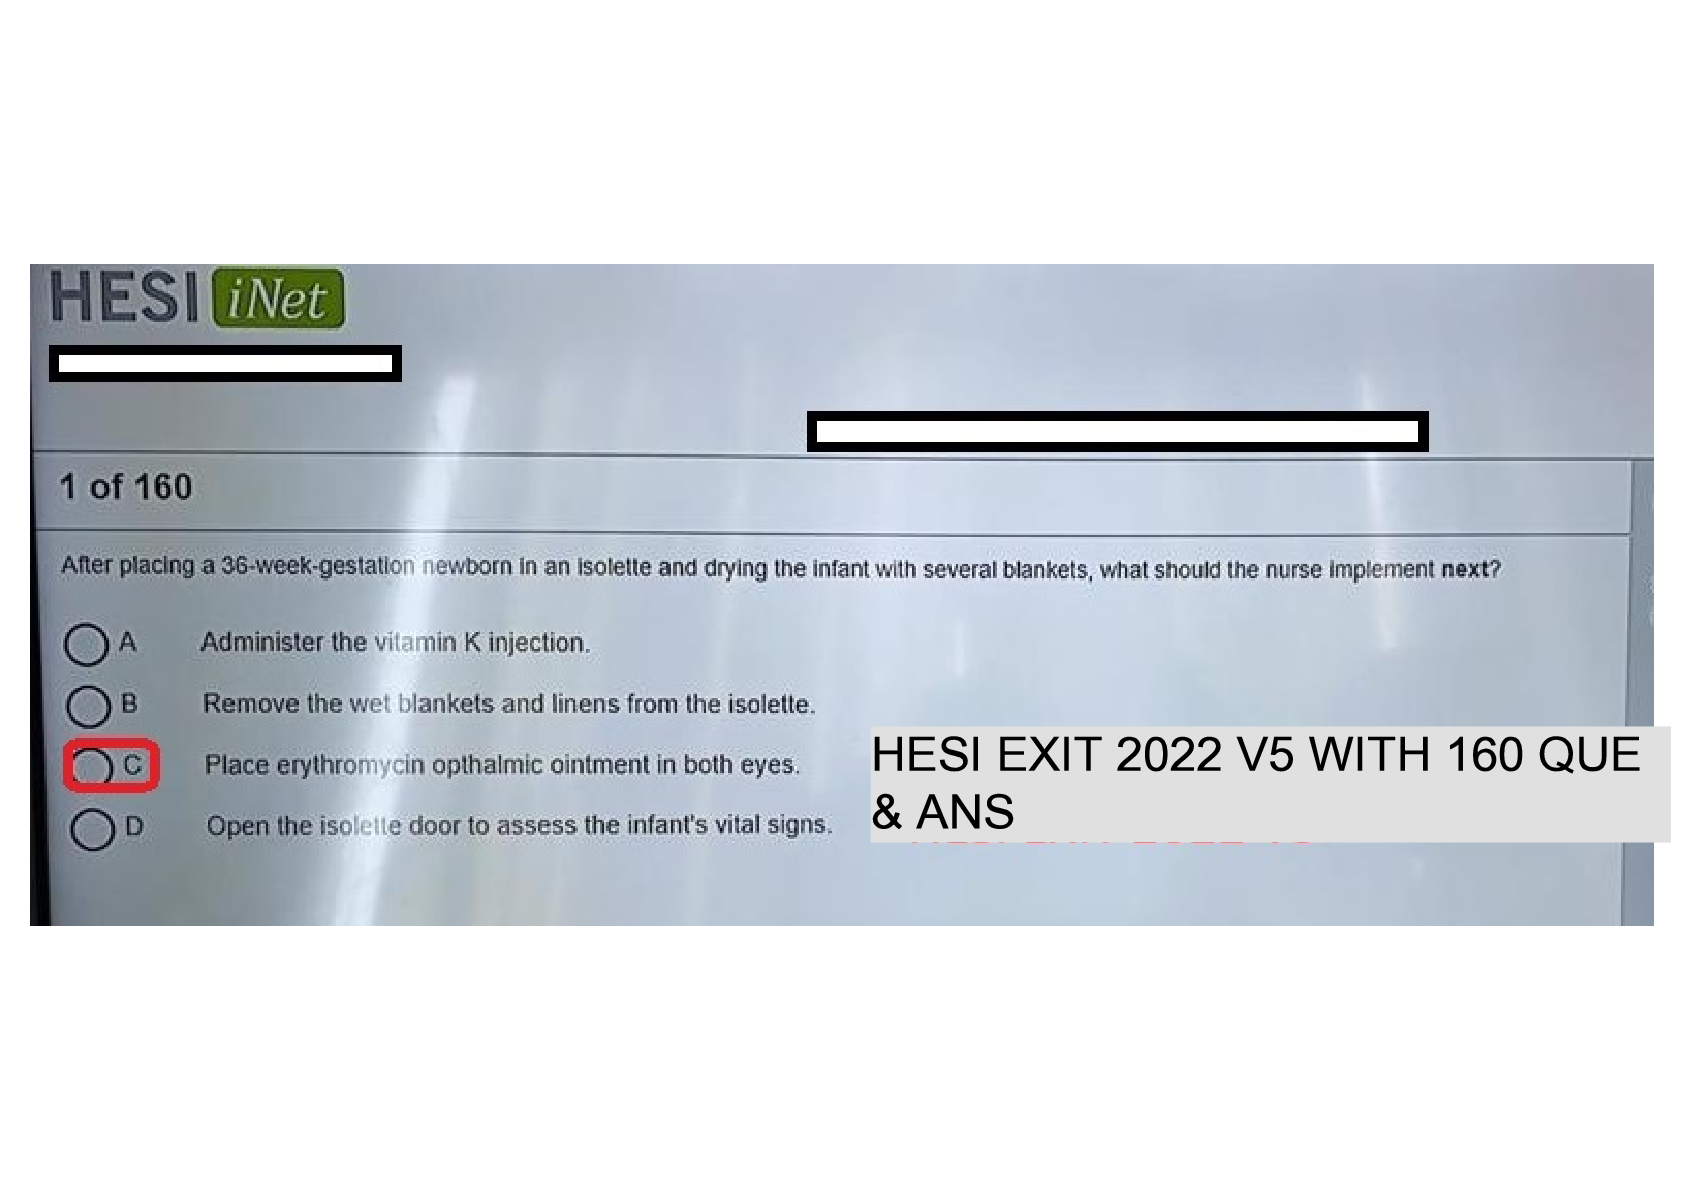 HESI EXIT RN 2022 V5 REAL EXAM (Actual Screenshots from exam taken in